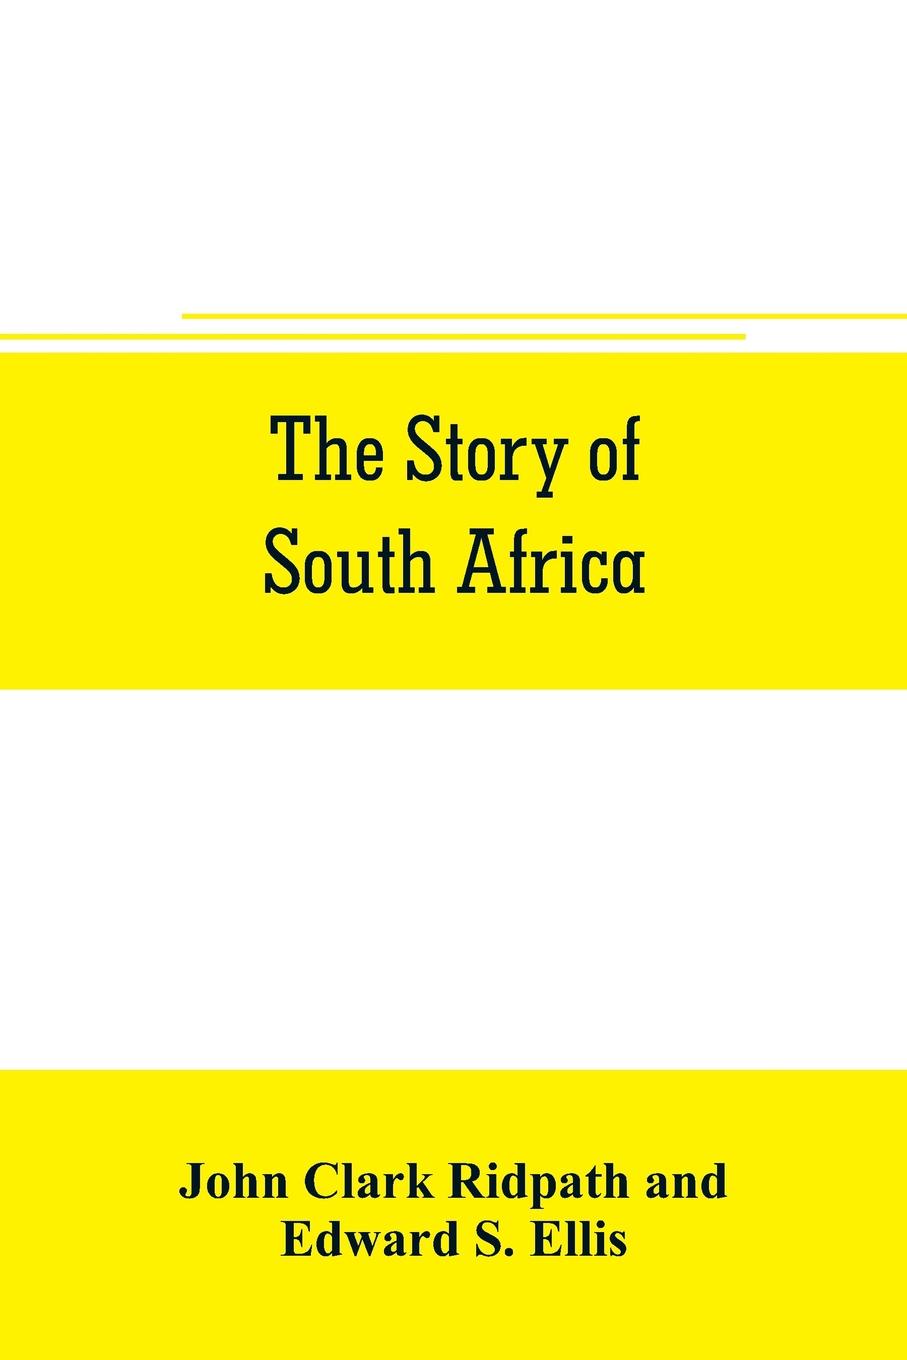 The story of South Africa. An account of the historical transformation of the dark continent by the european powers and the culminating contest between great britain and the south african r& public in the Transvaal war